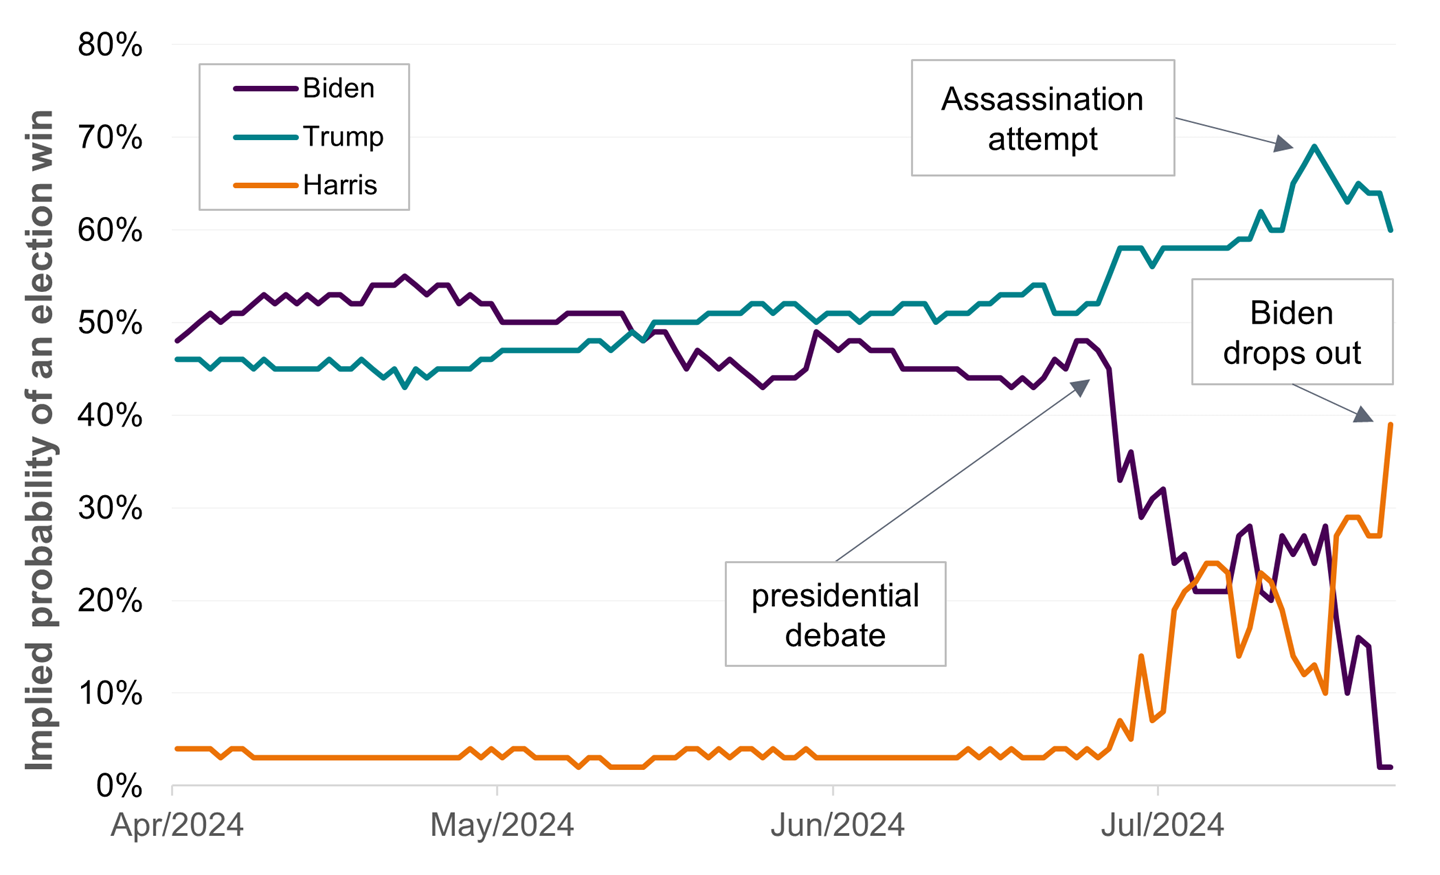 Line chart illustrating the implied probability of who will win the 2024 US presidential election based on prediction market odds. Information shown is from April to July 2024 and indicates Trump will win the US election. 